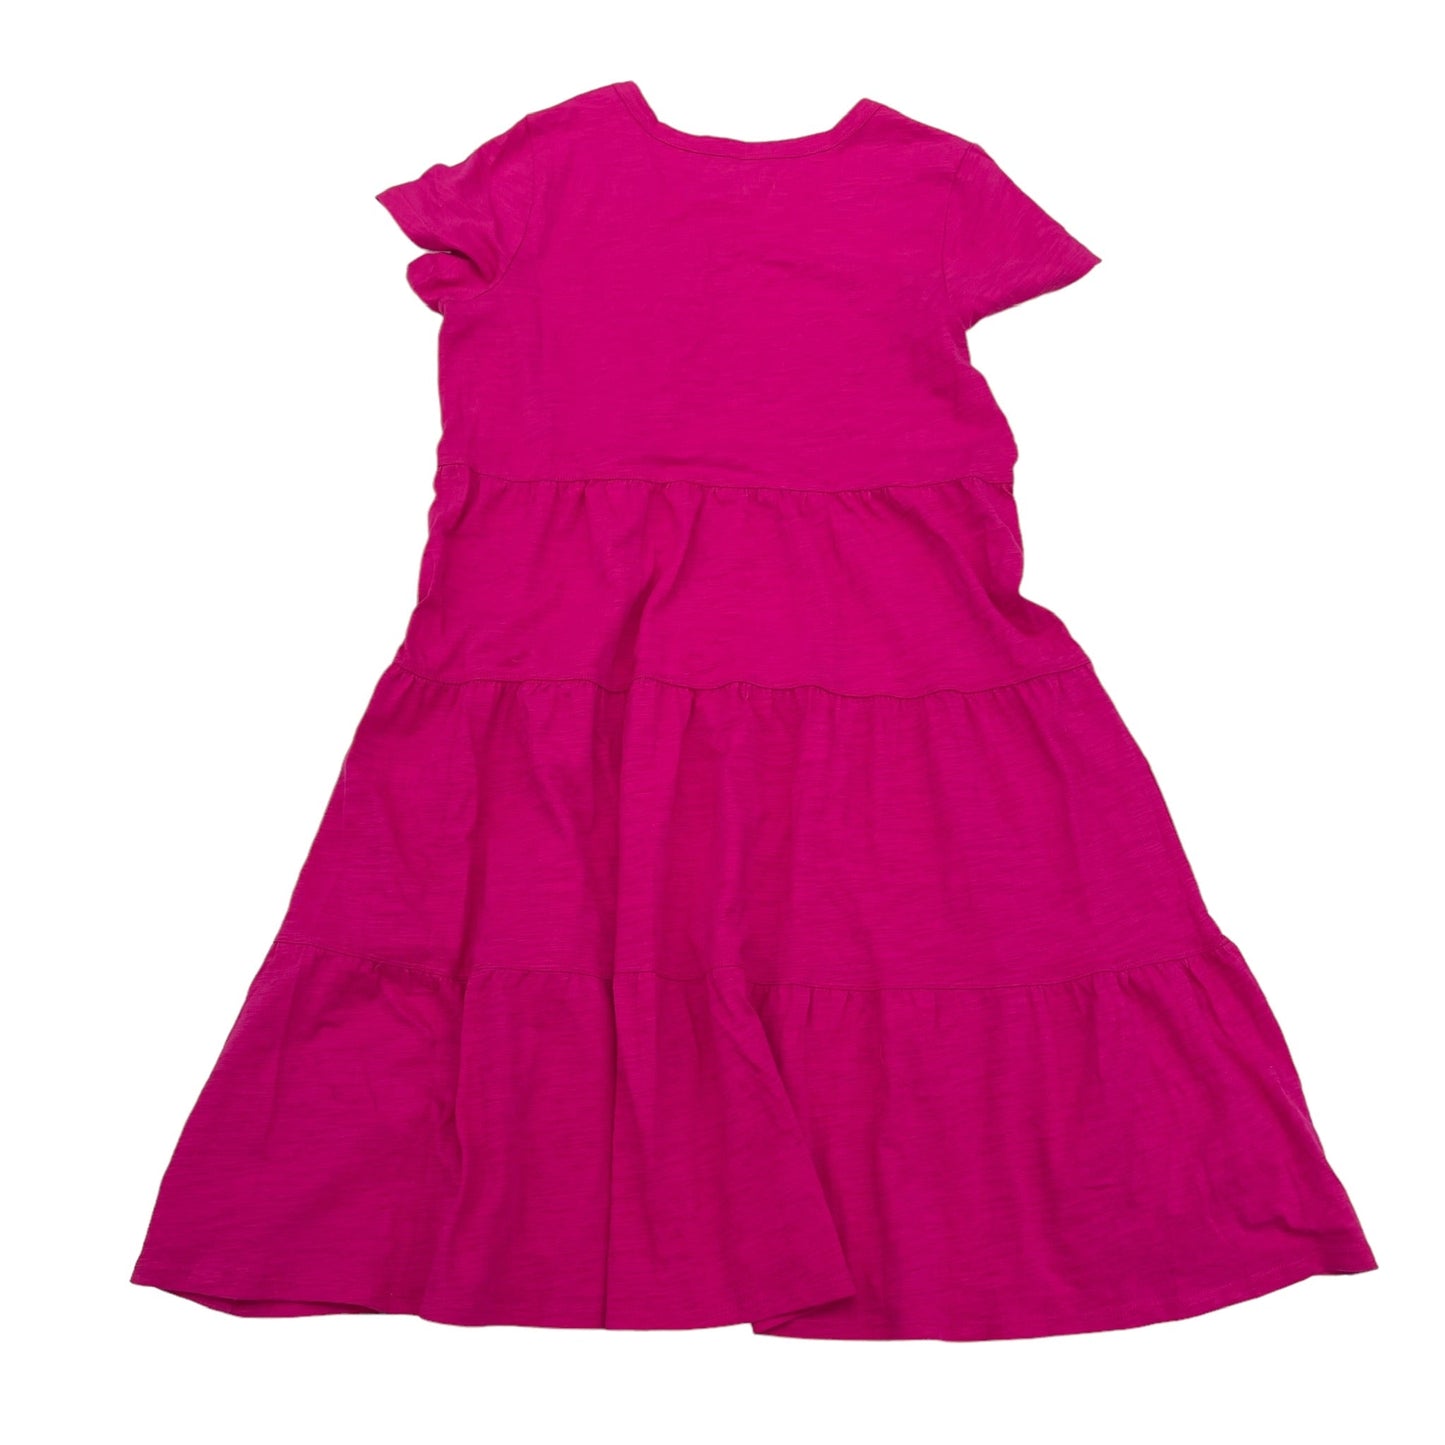 Pink Dress Casual Short Time And Tru, Size M